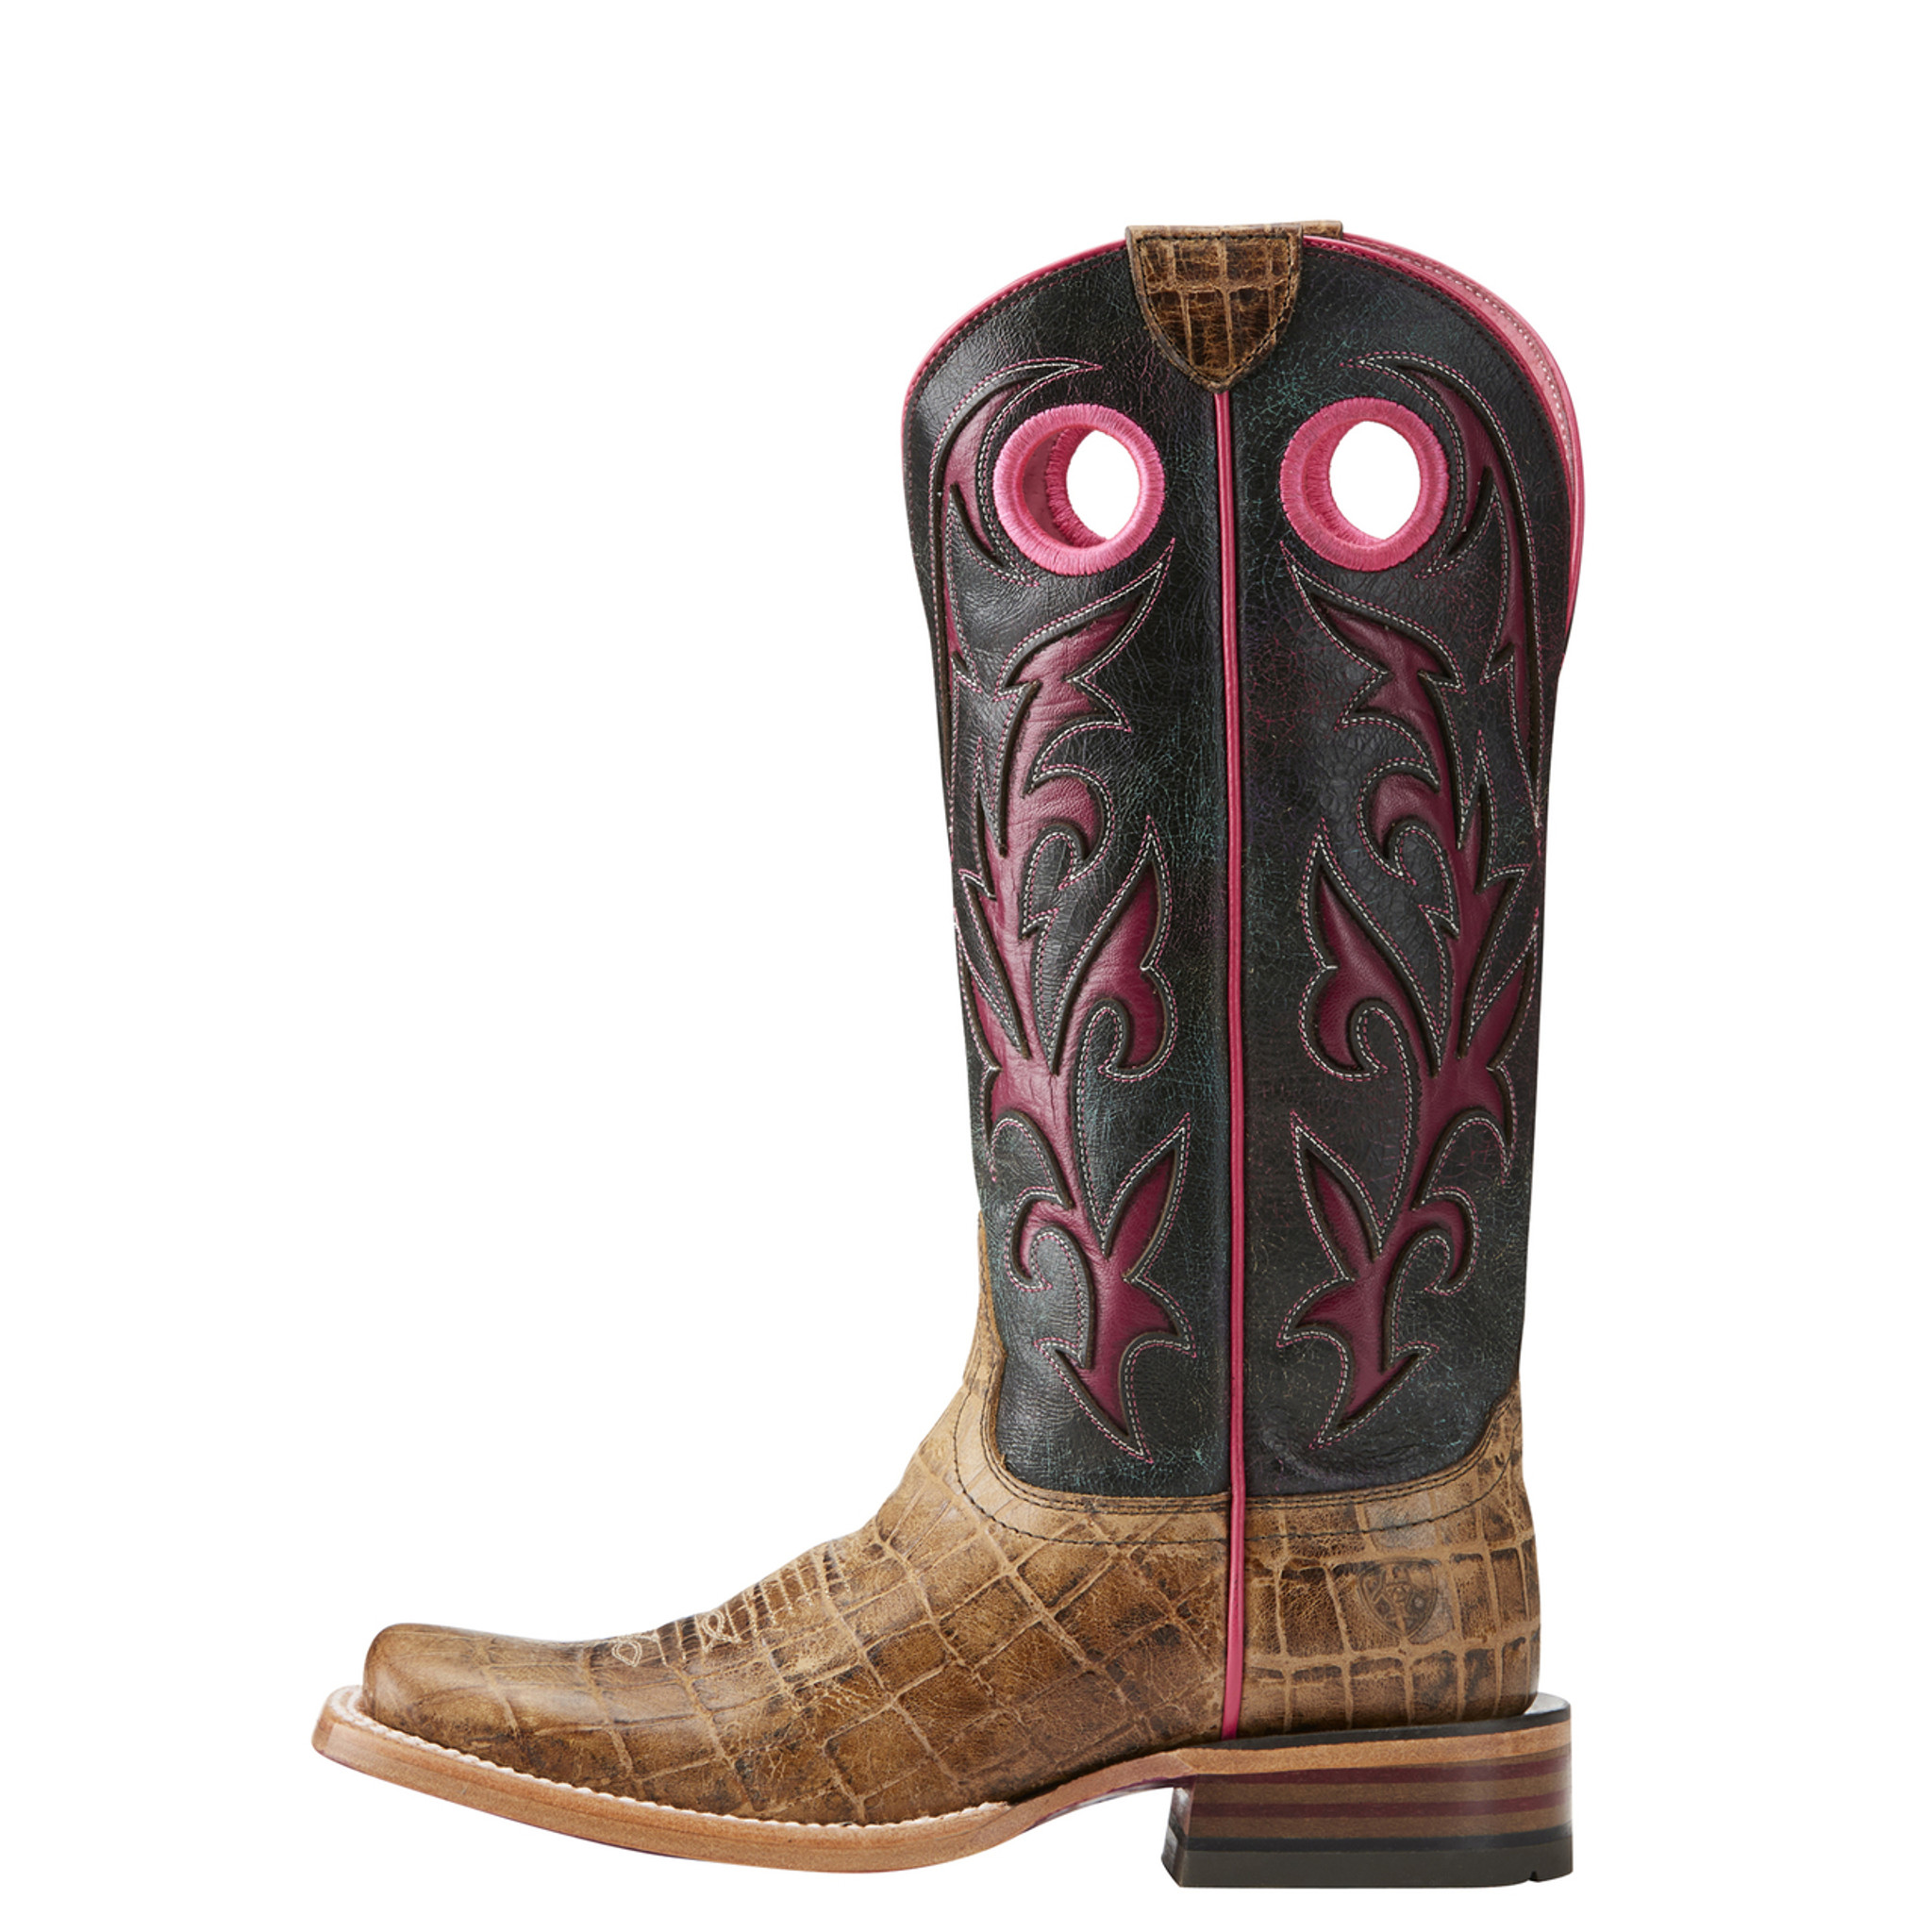 Women's Ariat Boot, Cracked Brown Vamp, Black Top with Pink Inlay - Elms Entry Western Store and Rodeo Shop